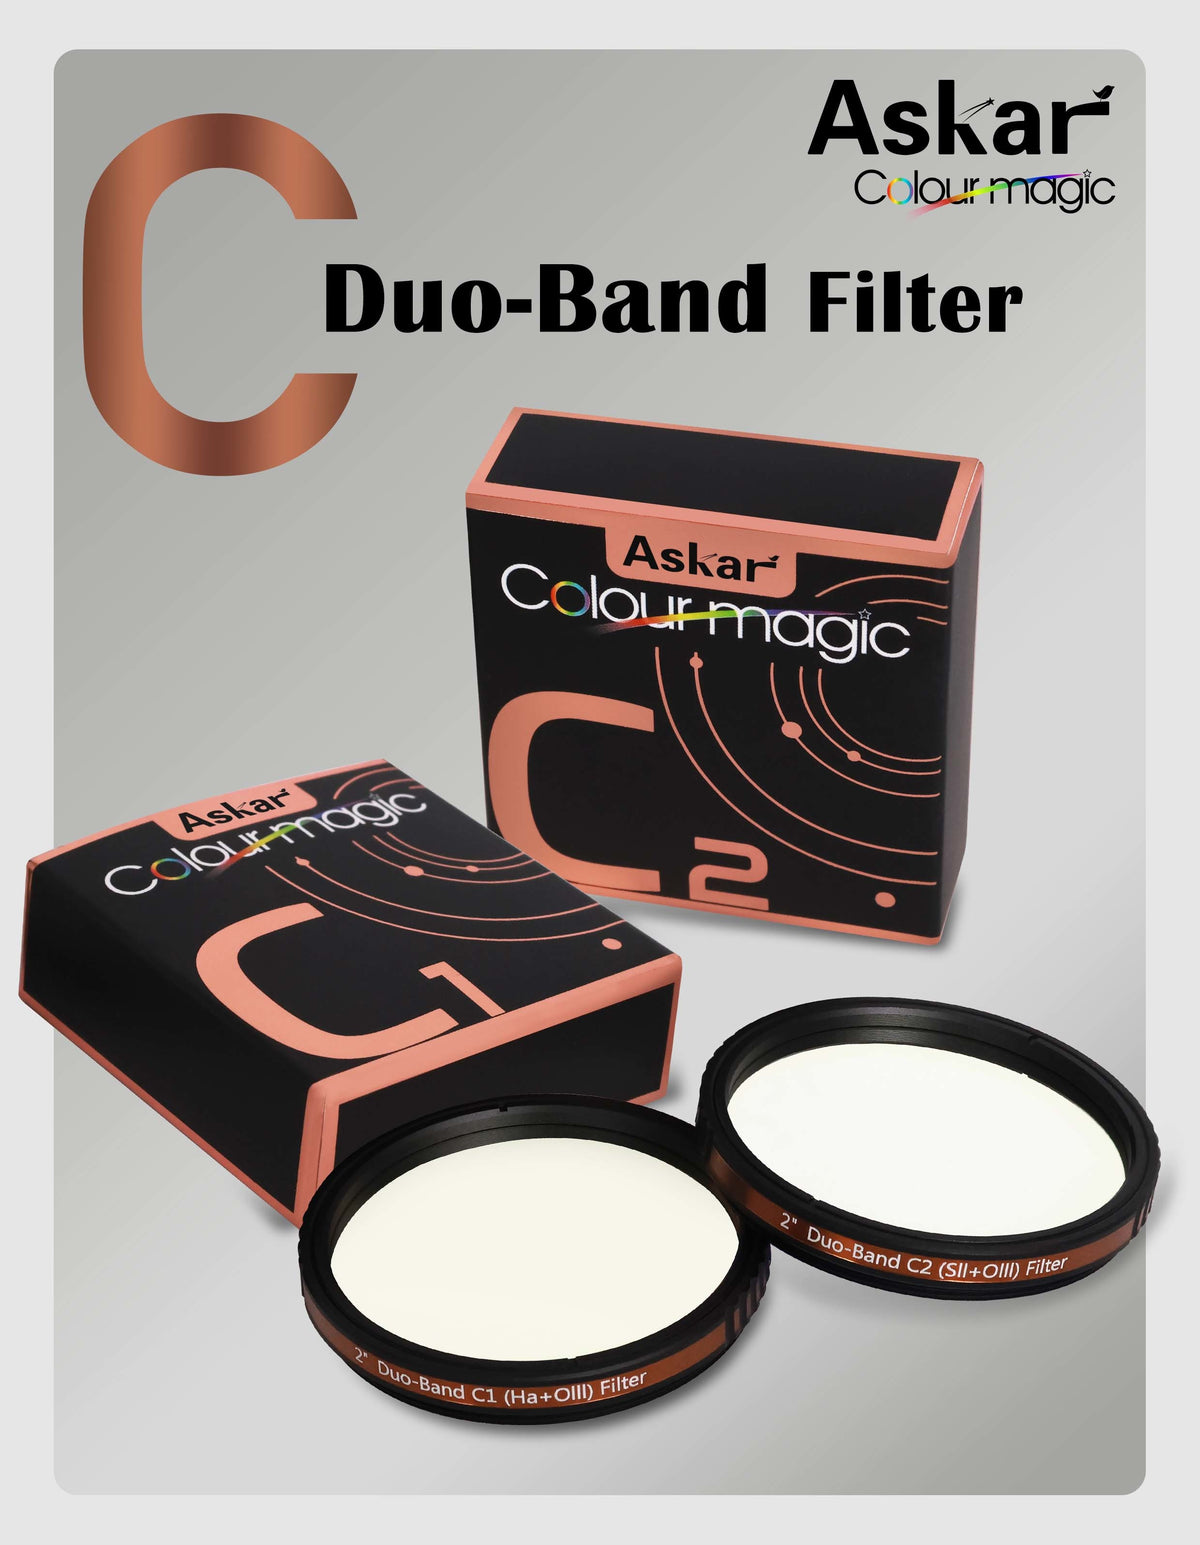 Askar Colour Magic C1 and C2 Duo-Band Filters and Filter Boxes